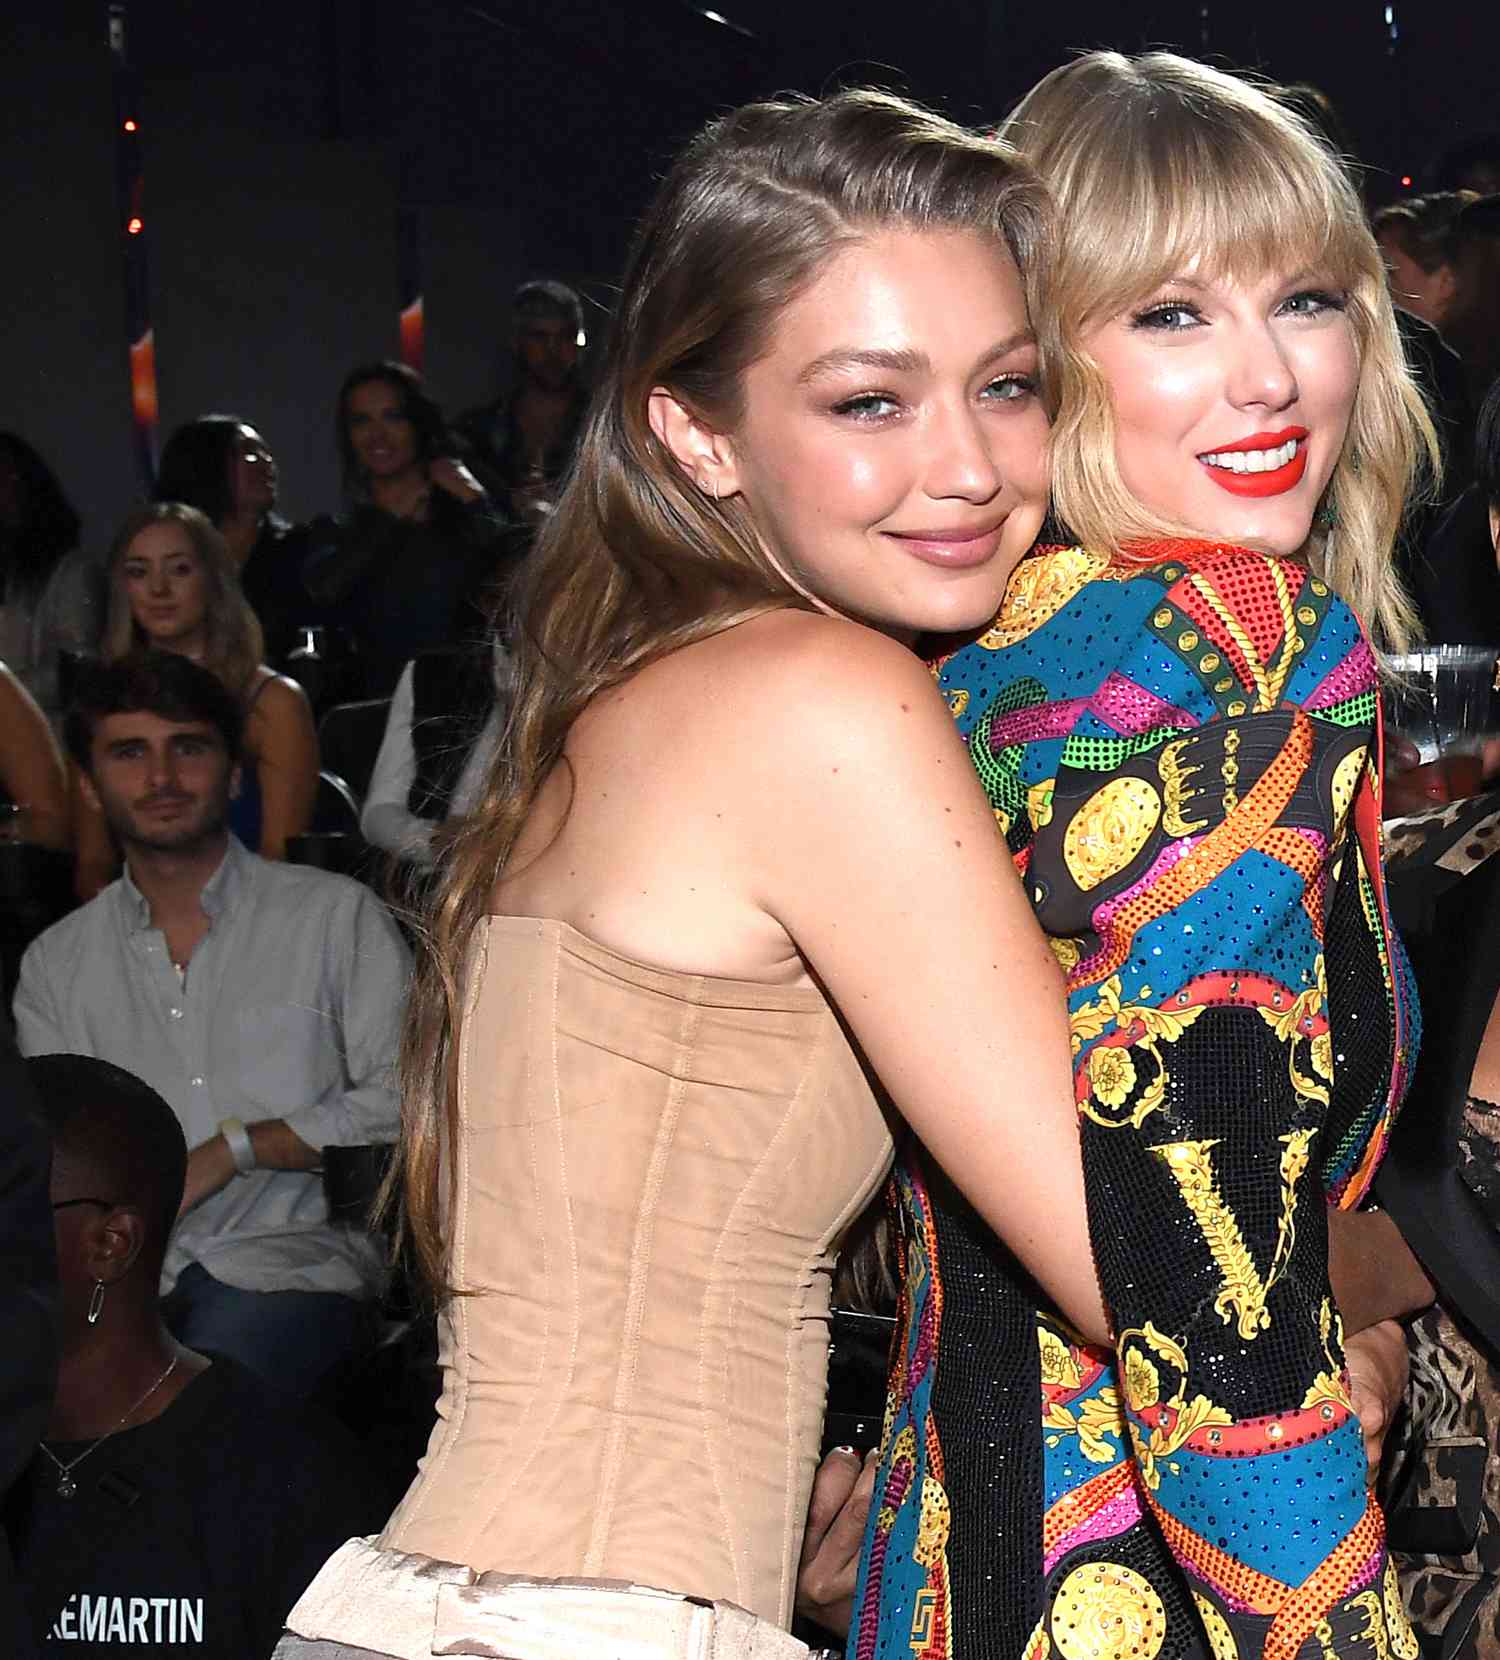 Gigi Hadid Said She Is an "Embarrassing Friend" at Taylor Swift Concerts